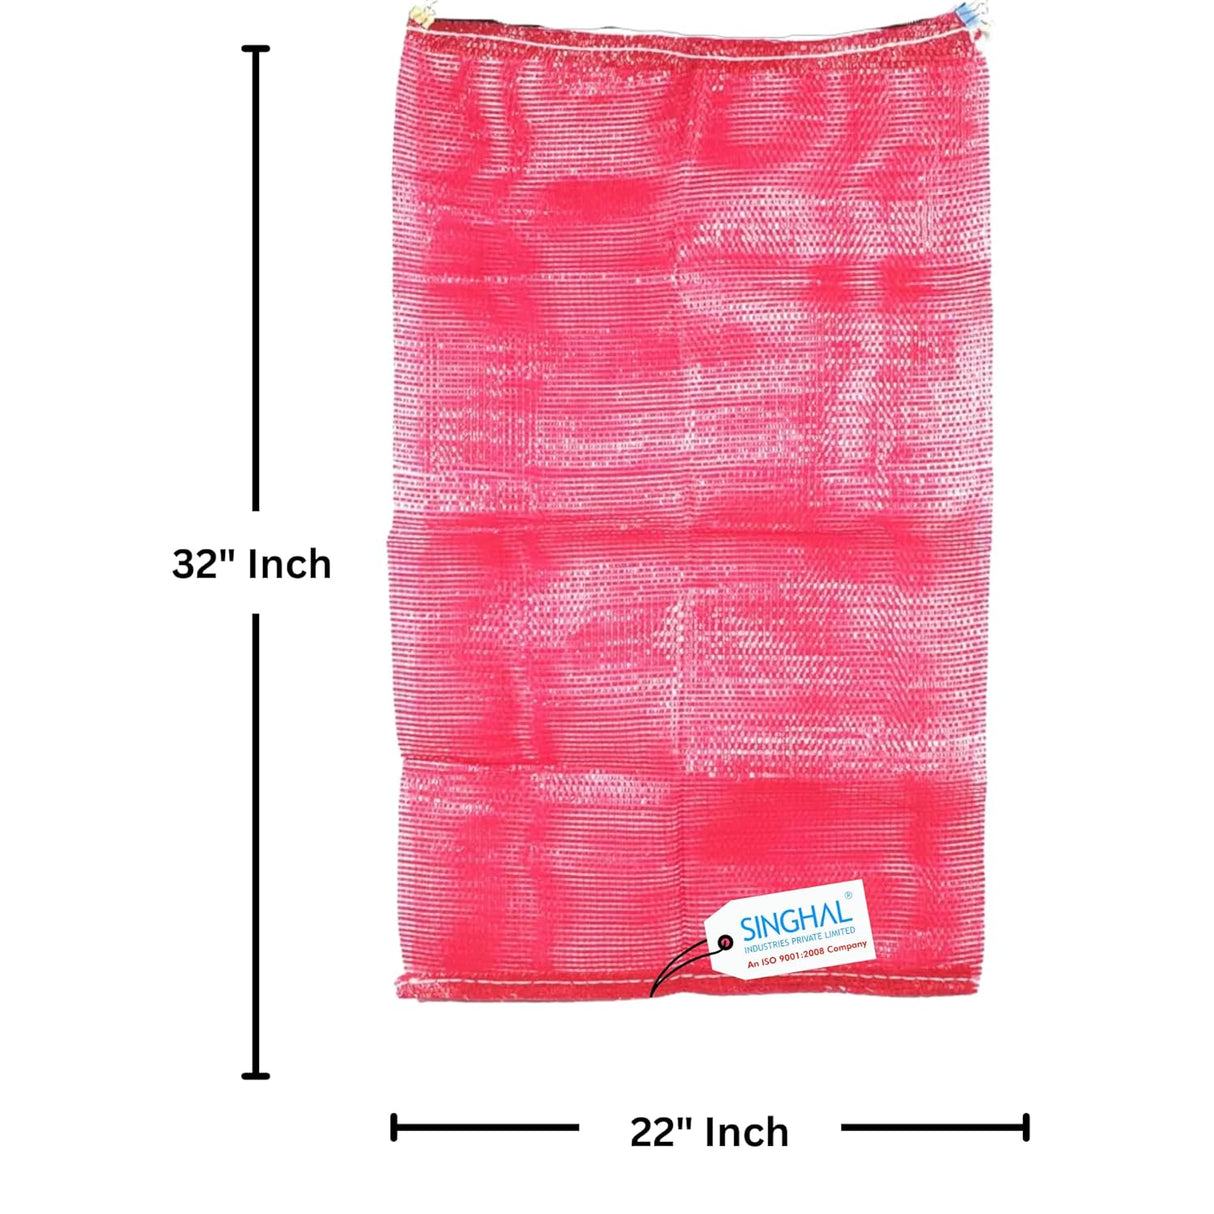 Singhal PP Mesh Storage Bags 22x32 Inch with Drawstring, Magenta (Rani Pink) Color | upto 40kg capacity Great for Packaging Produce, Vegetables and Fruit | Multipurpose Bora, Bori (10)